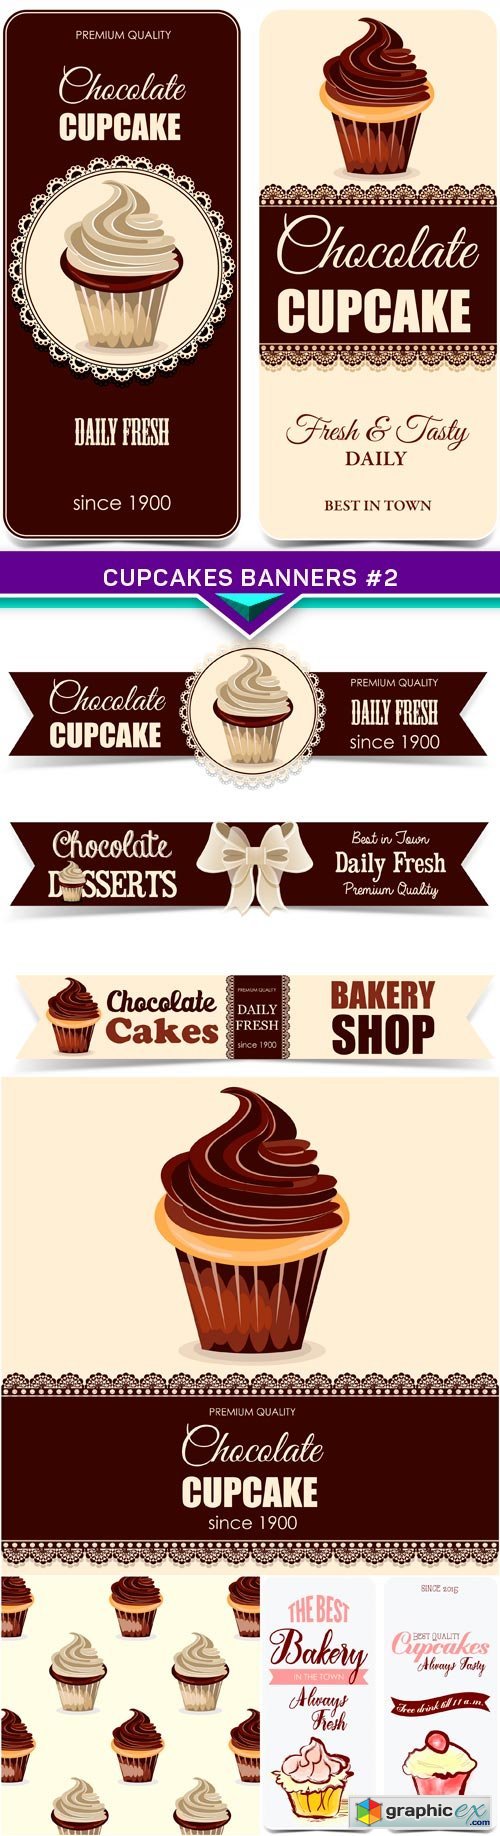 Cupcakes banners #2 5X EPS